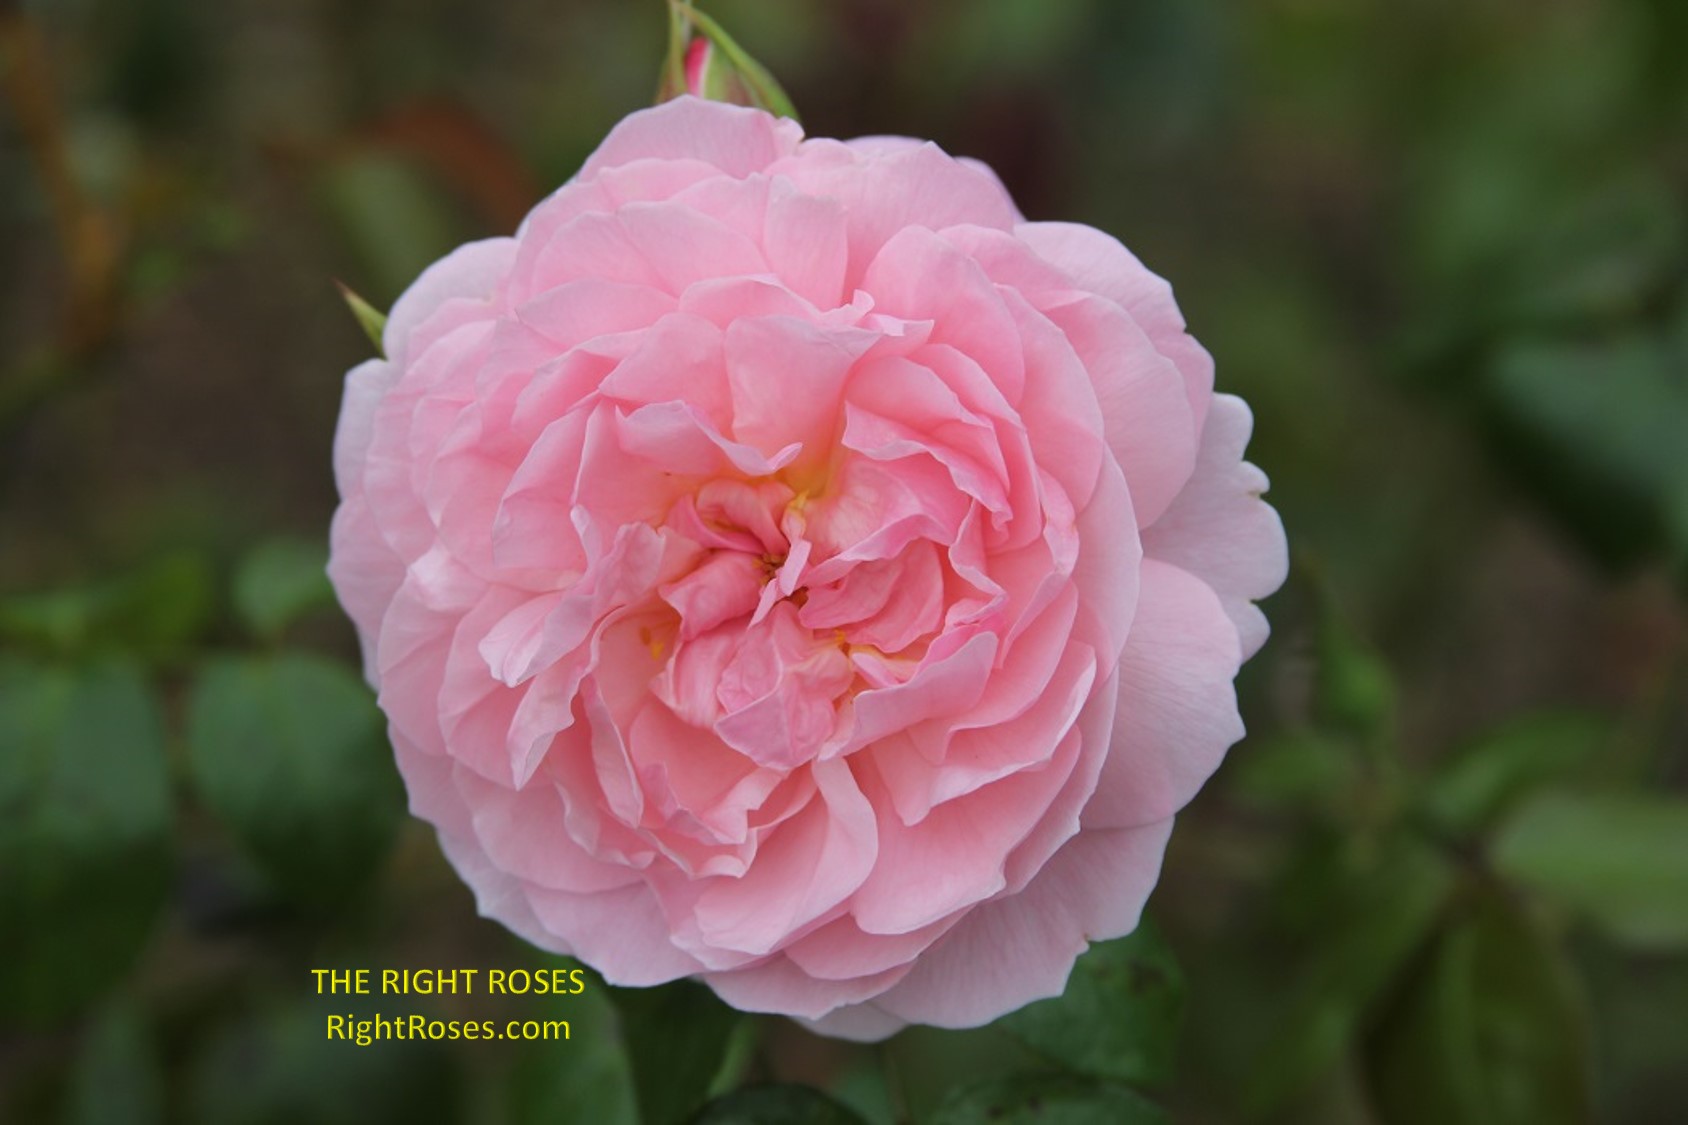 The best rose review of rose 'Strawberry Hill' by The Right Roses. Our in-depth reviews have been trusted by millions gardeners worldwide. The Right Roses team uses our own The Right Roses Score, which is the most comprehensive rose rating system, to assess the overall quality of a rose. All information and rose products: best top garden store, david austin, english roses, rose products, rose rating, the right leap, rose food, fertilizer